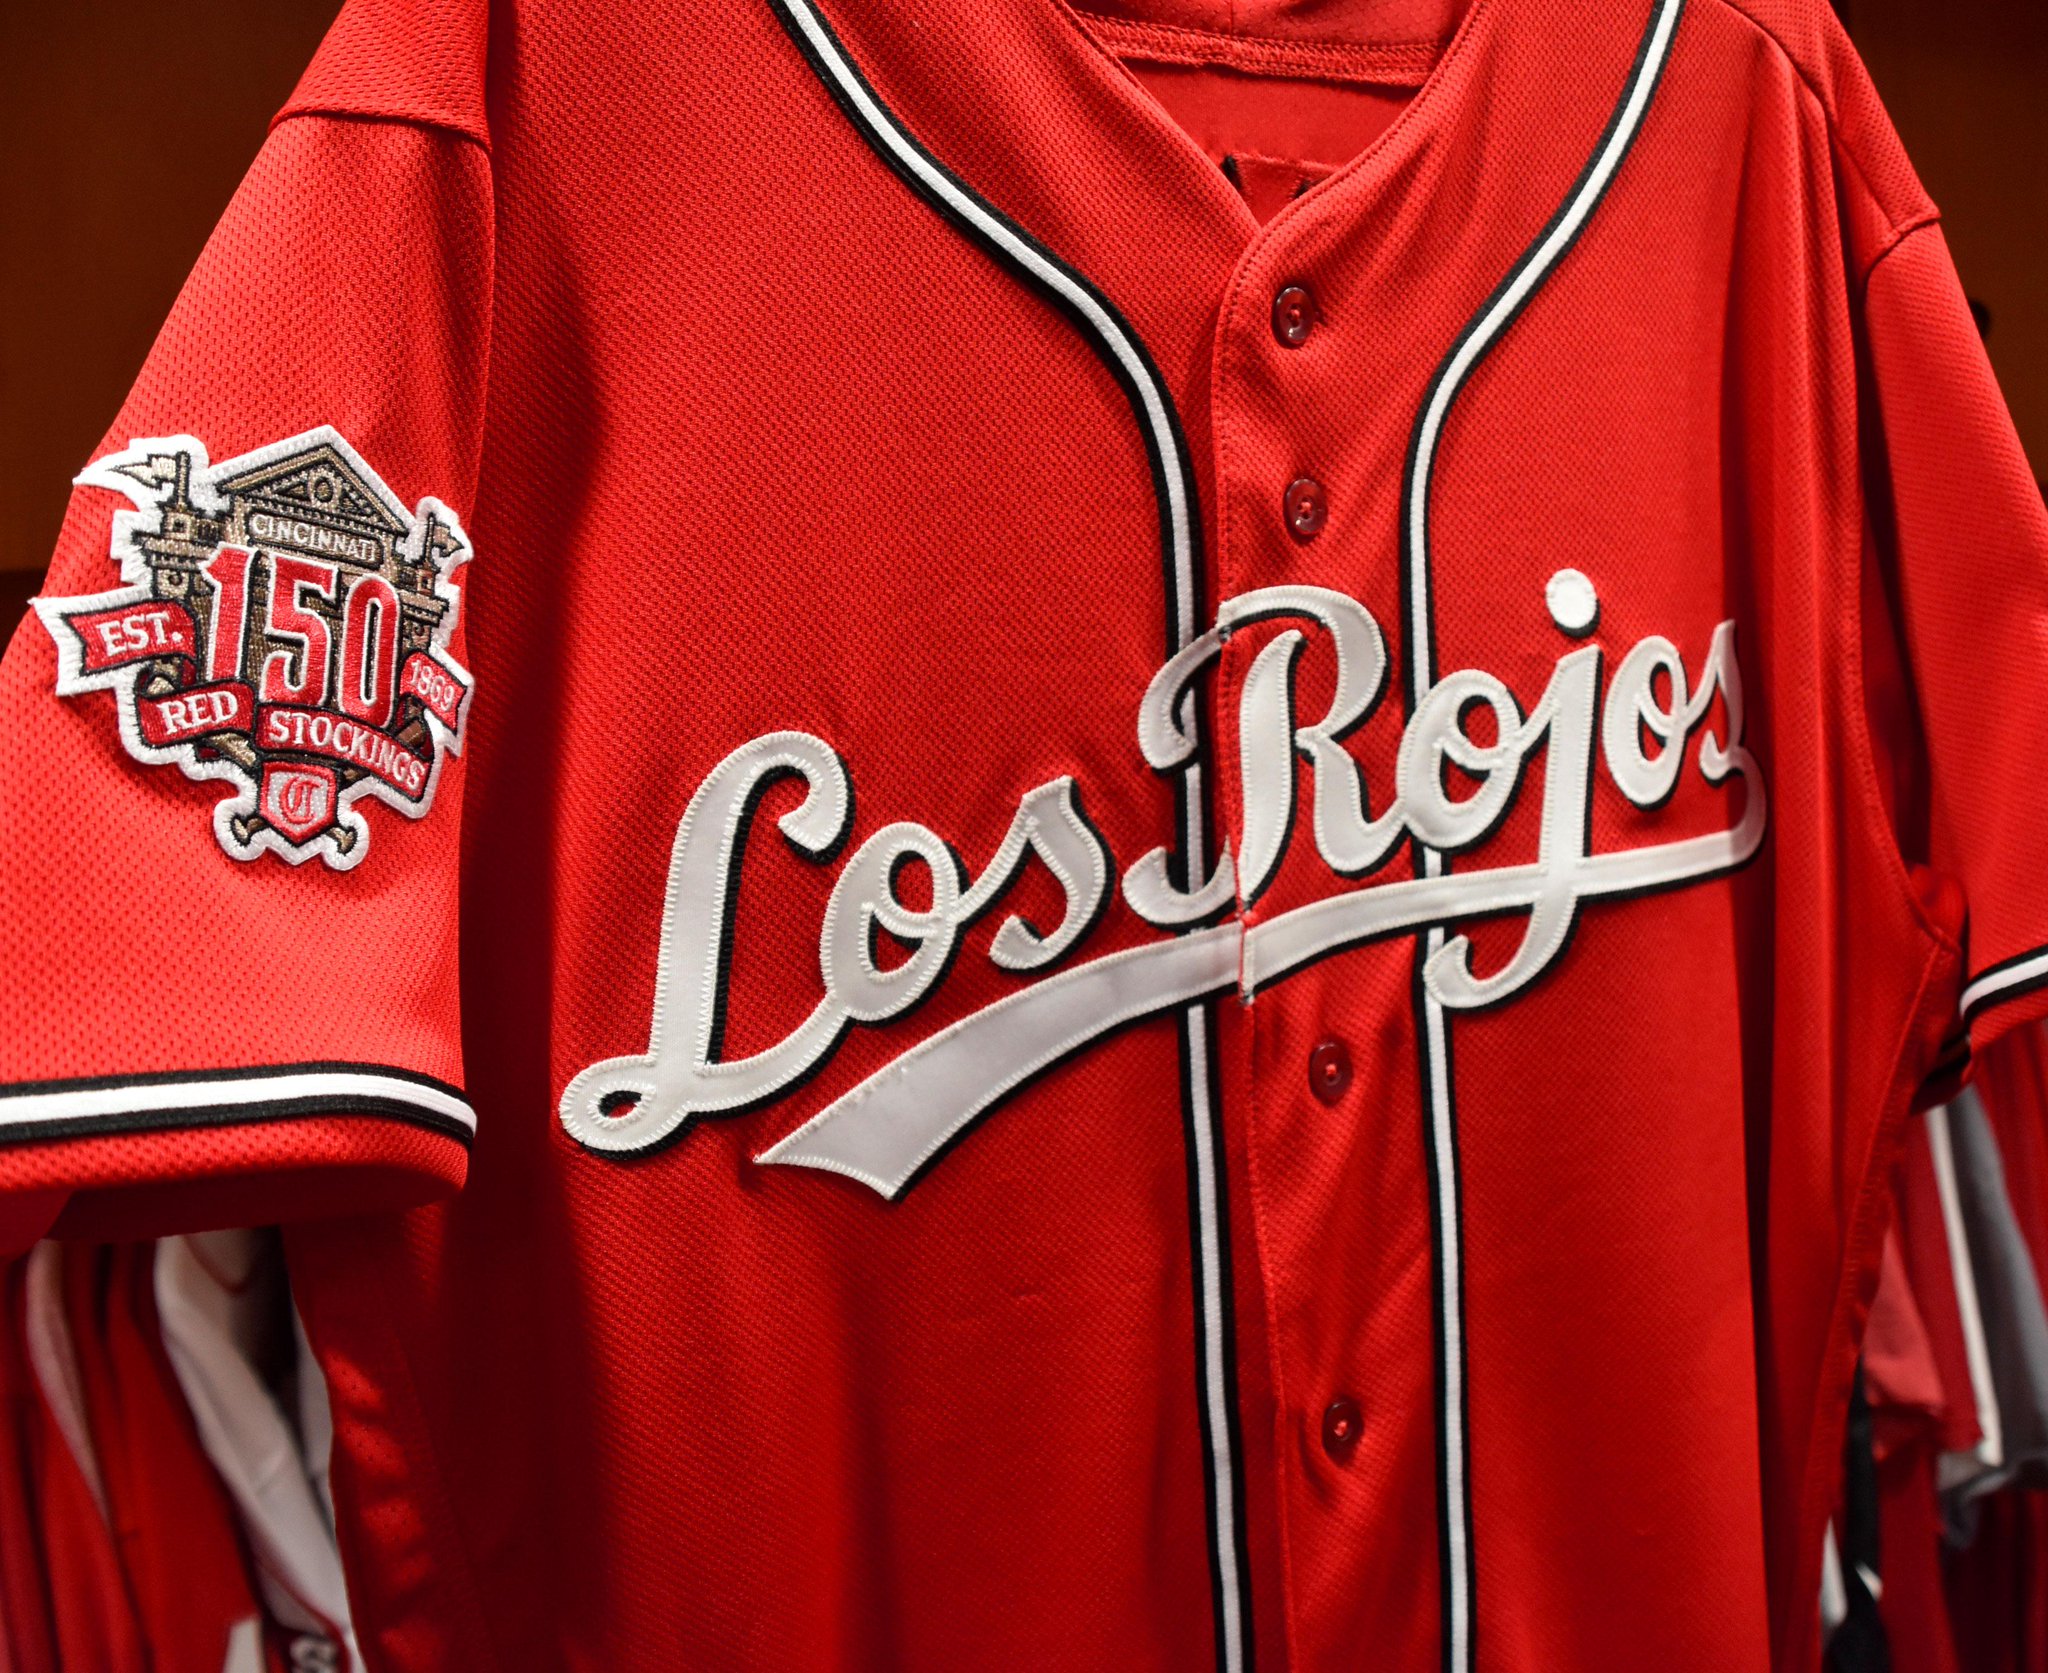 Cincinnati Reds on Twitter: "The Reds tonight will don Los Rojos jerseys as  part of "Fiesta Rojos" as we honor the local Hispanic community and the  rich cultural history of the franchise. #